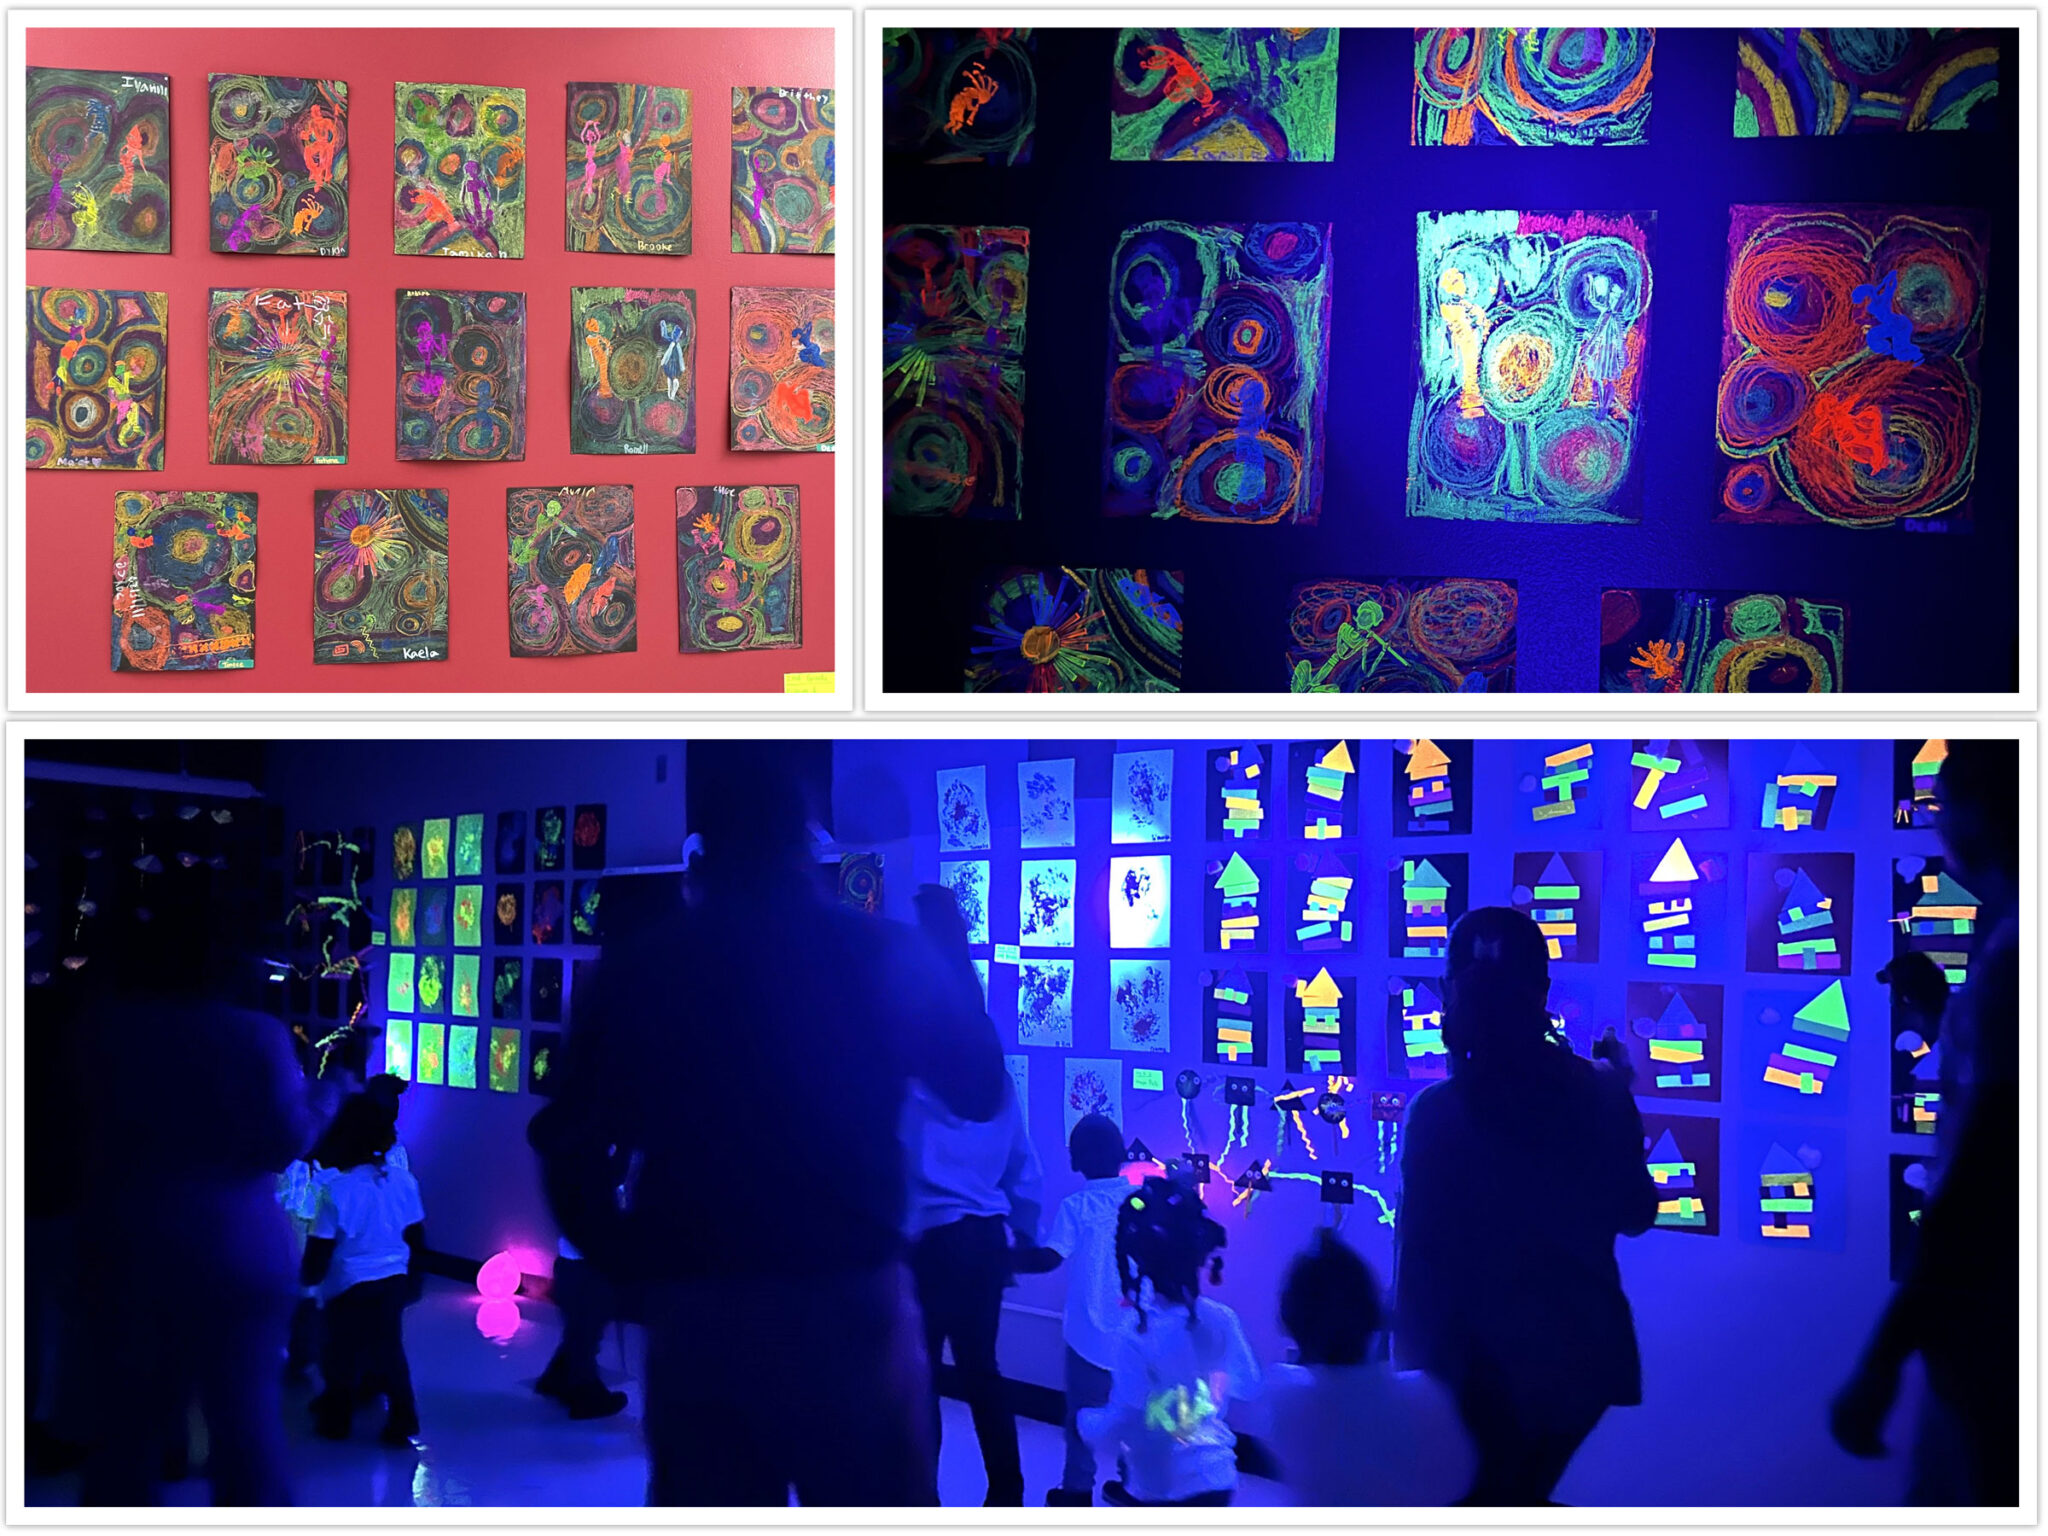 Parents, students, and staff delight walking through the Art Glow exhibit at Michelle Obama Elementary School where the art classroom was transformed into a gallery. Above, grade 2 artwork shown in regular light and flashlight